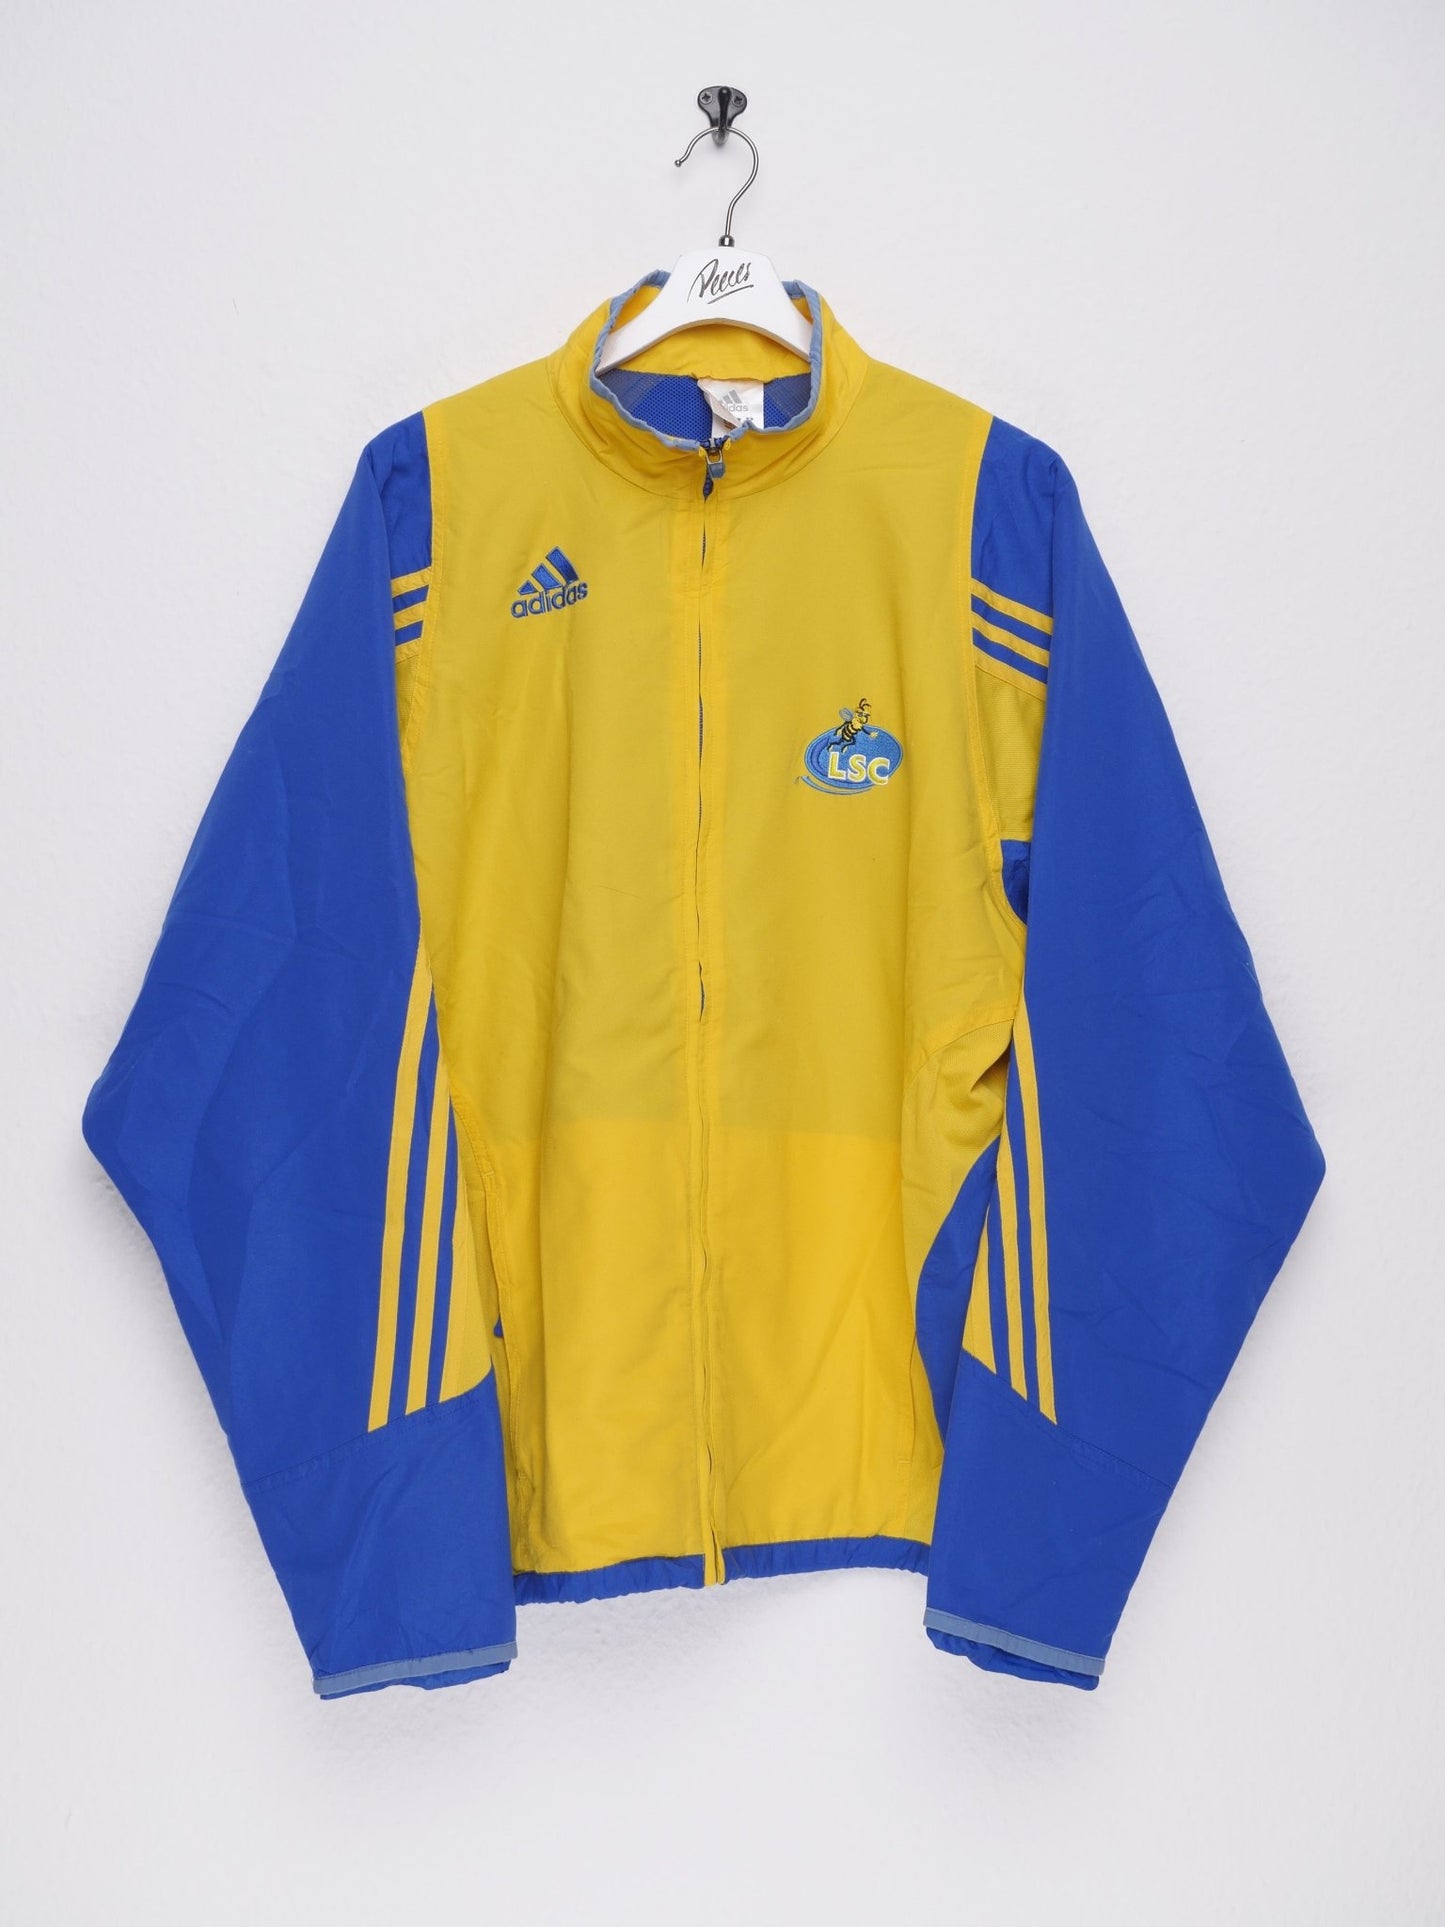 adidas embroidered Logo 'LSC' two toned Track Jacket - Peeces